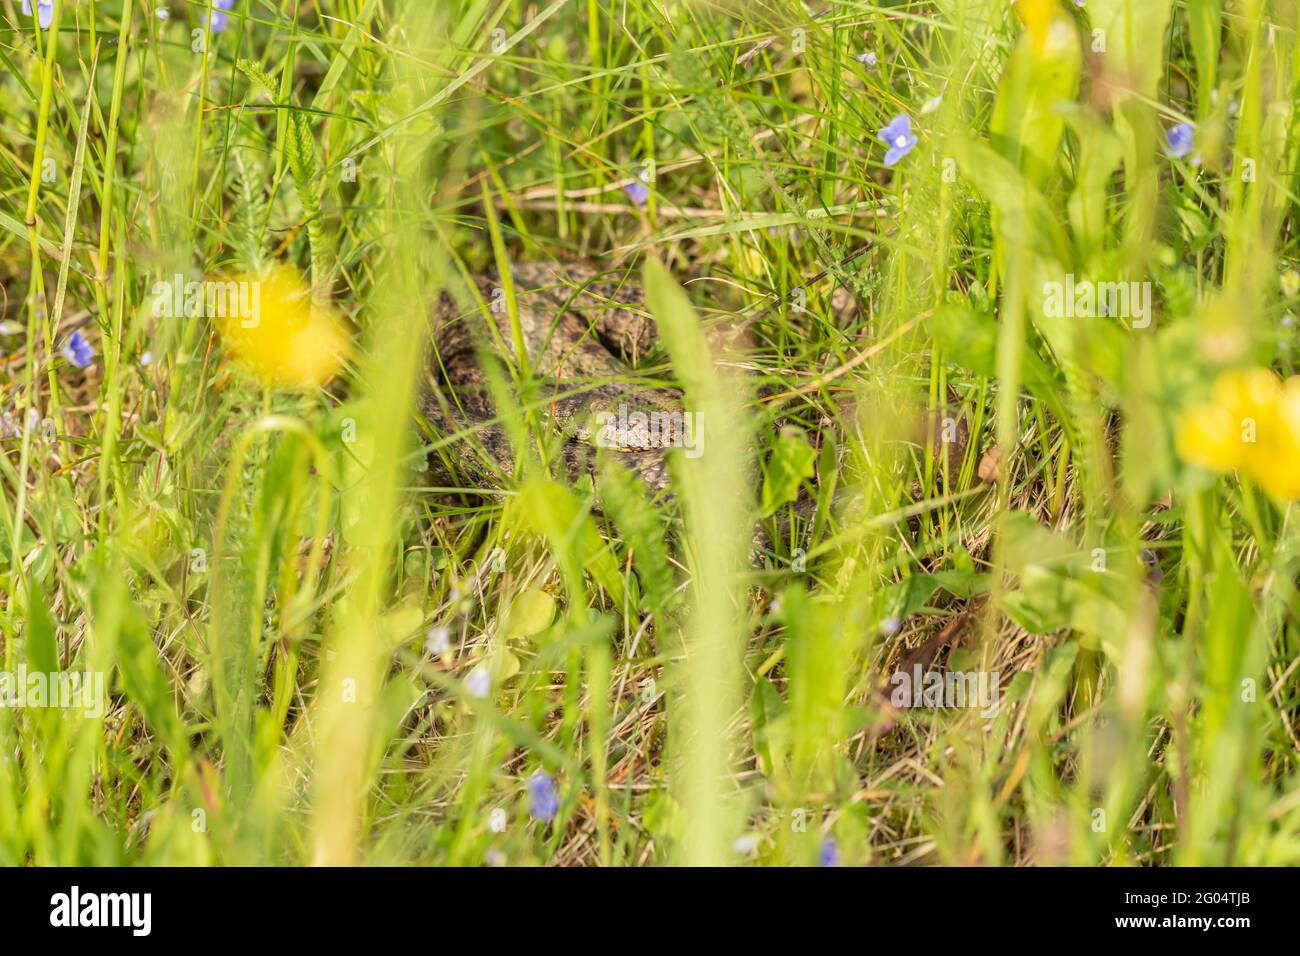 A well hidden smooth snake in the grass on a meadow Stock Photo